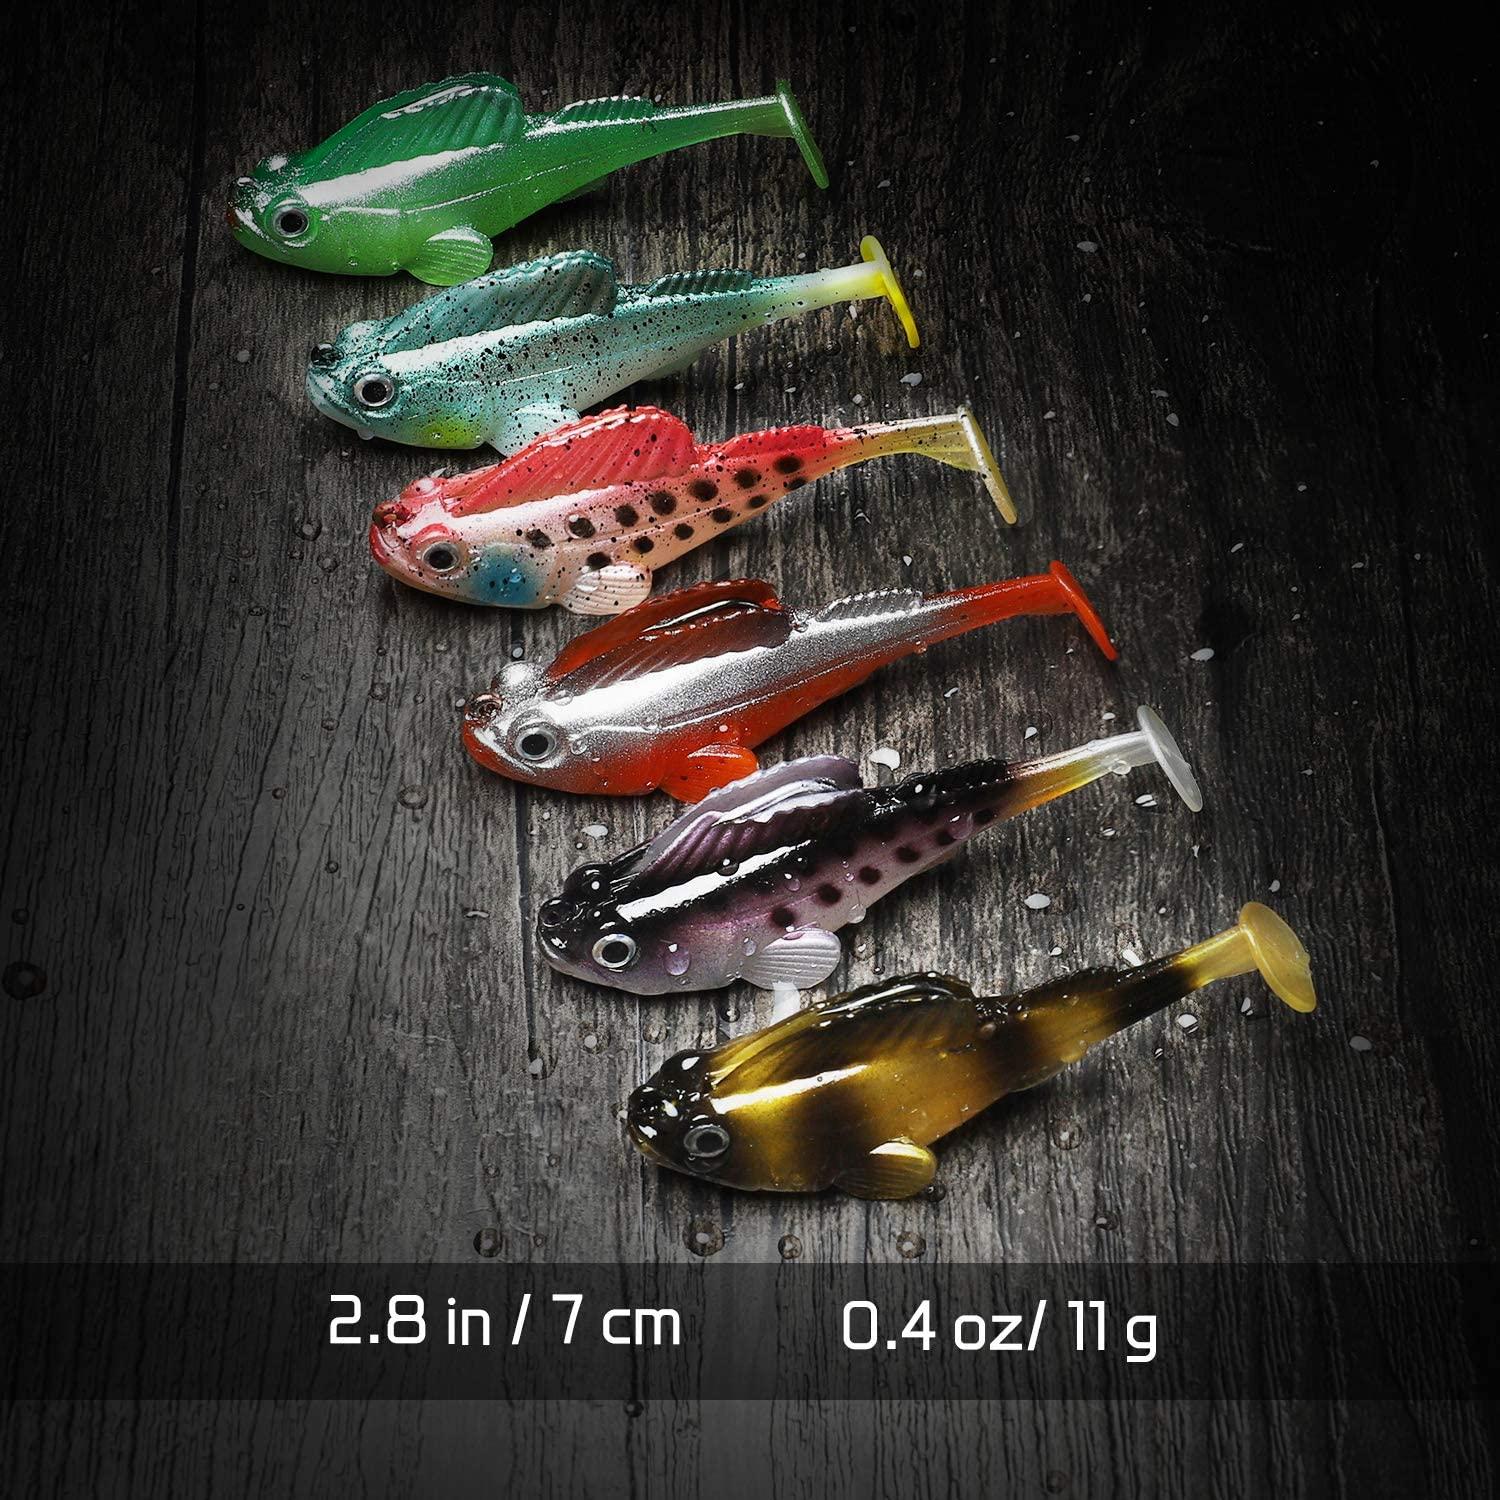 Fishing Lures Pre-Rigged Soft Fishing Lures Swimbaits,Weedless Fishing  Lures for Freshwater Saltwater,Soft Lures for Bass Trout Pike Walleye,  Fishing